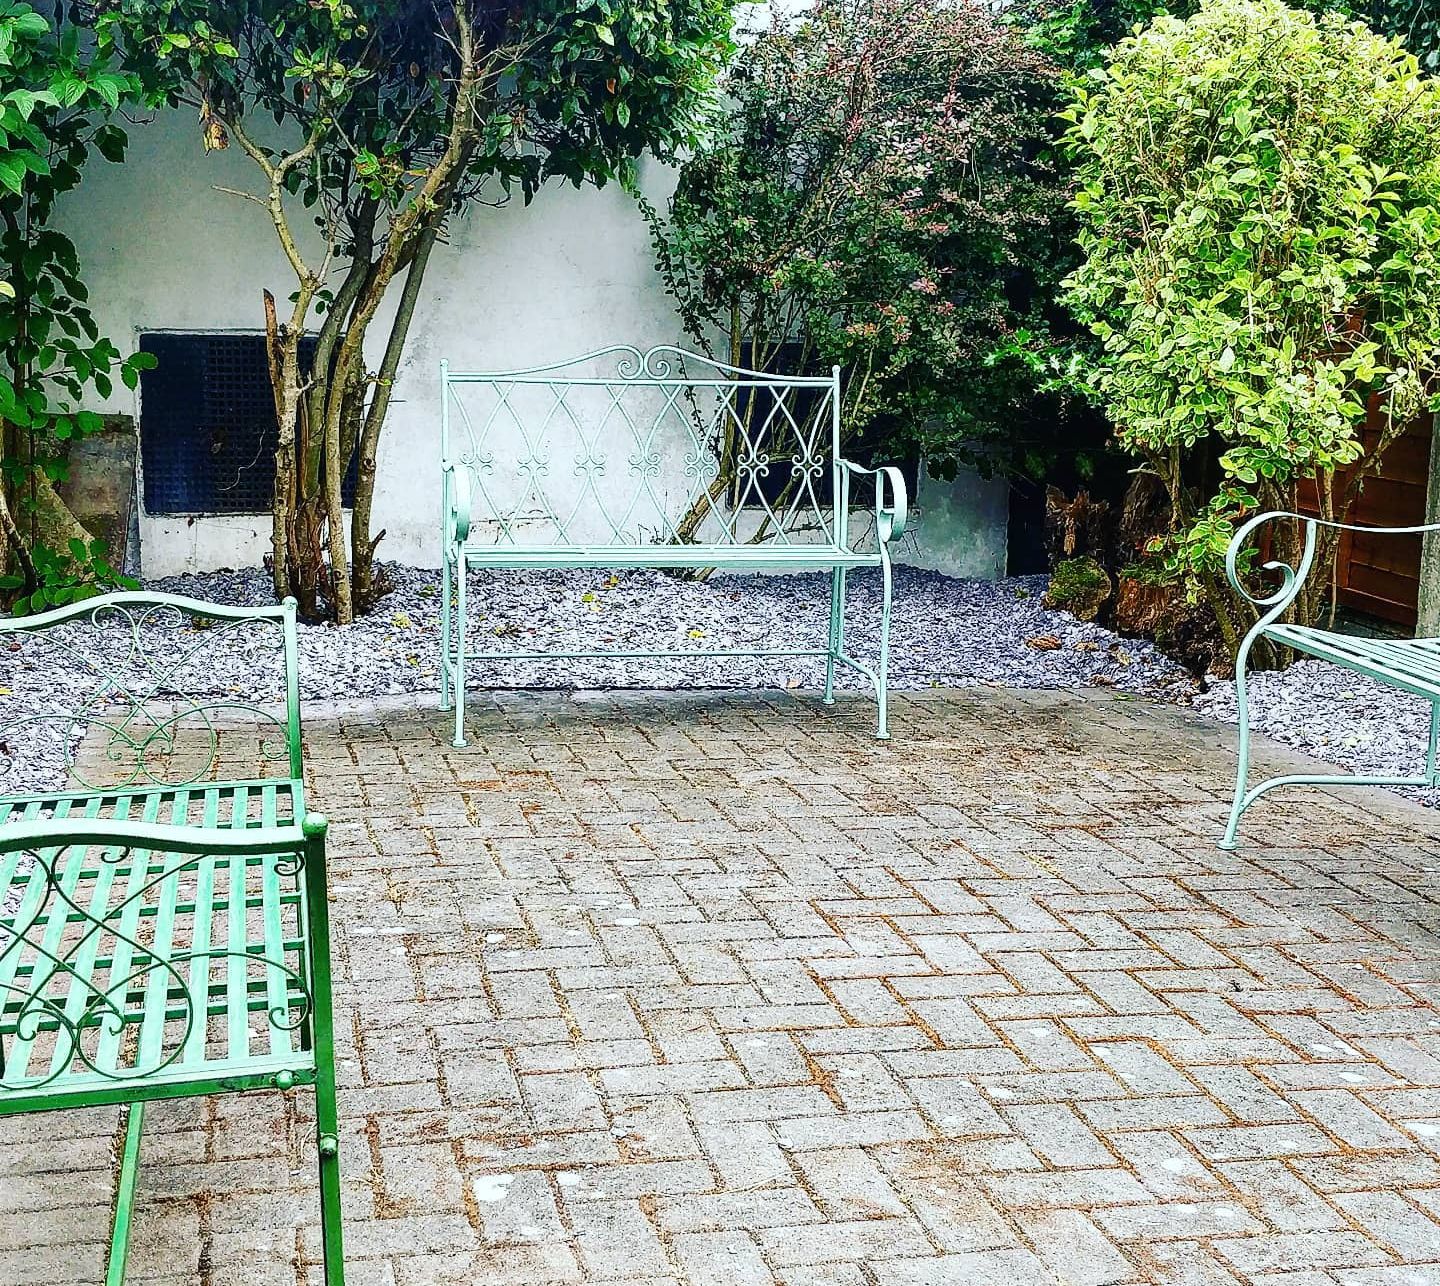 RS Fine Chocolate in Churchtown has unveiled its new Courtyard Garden